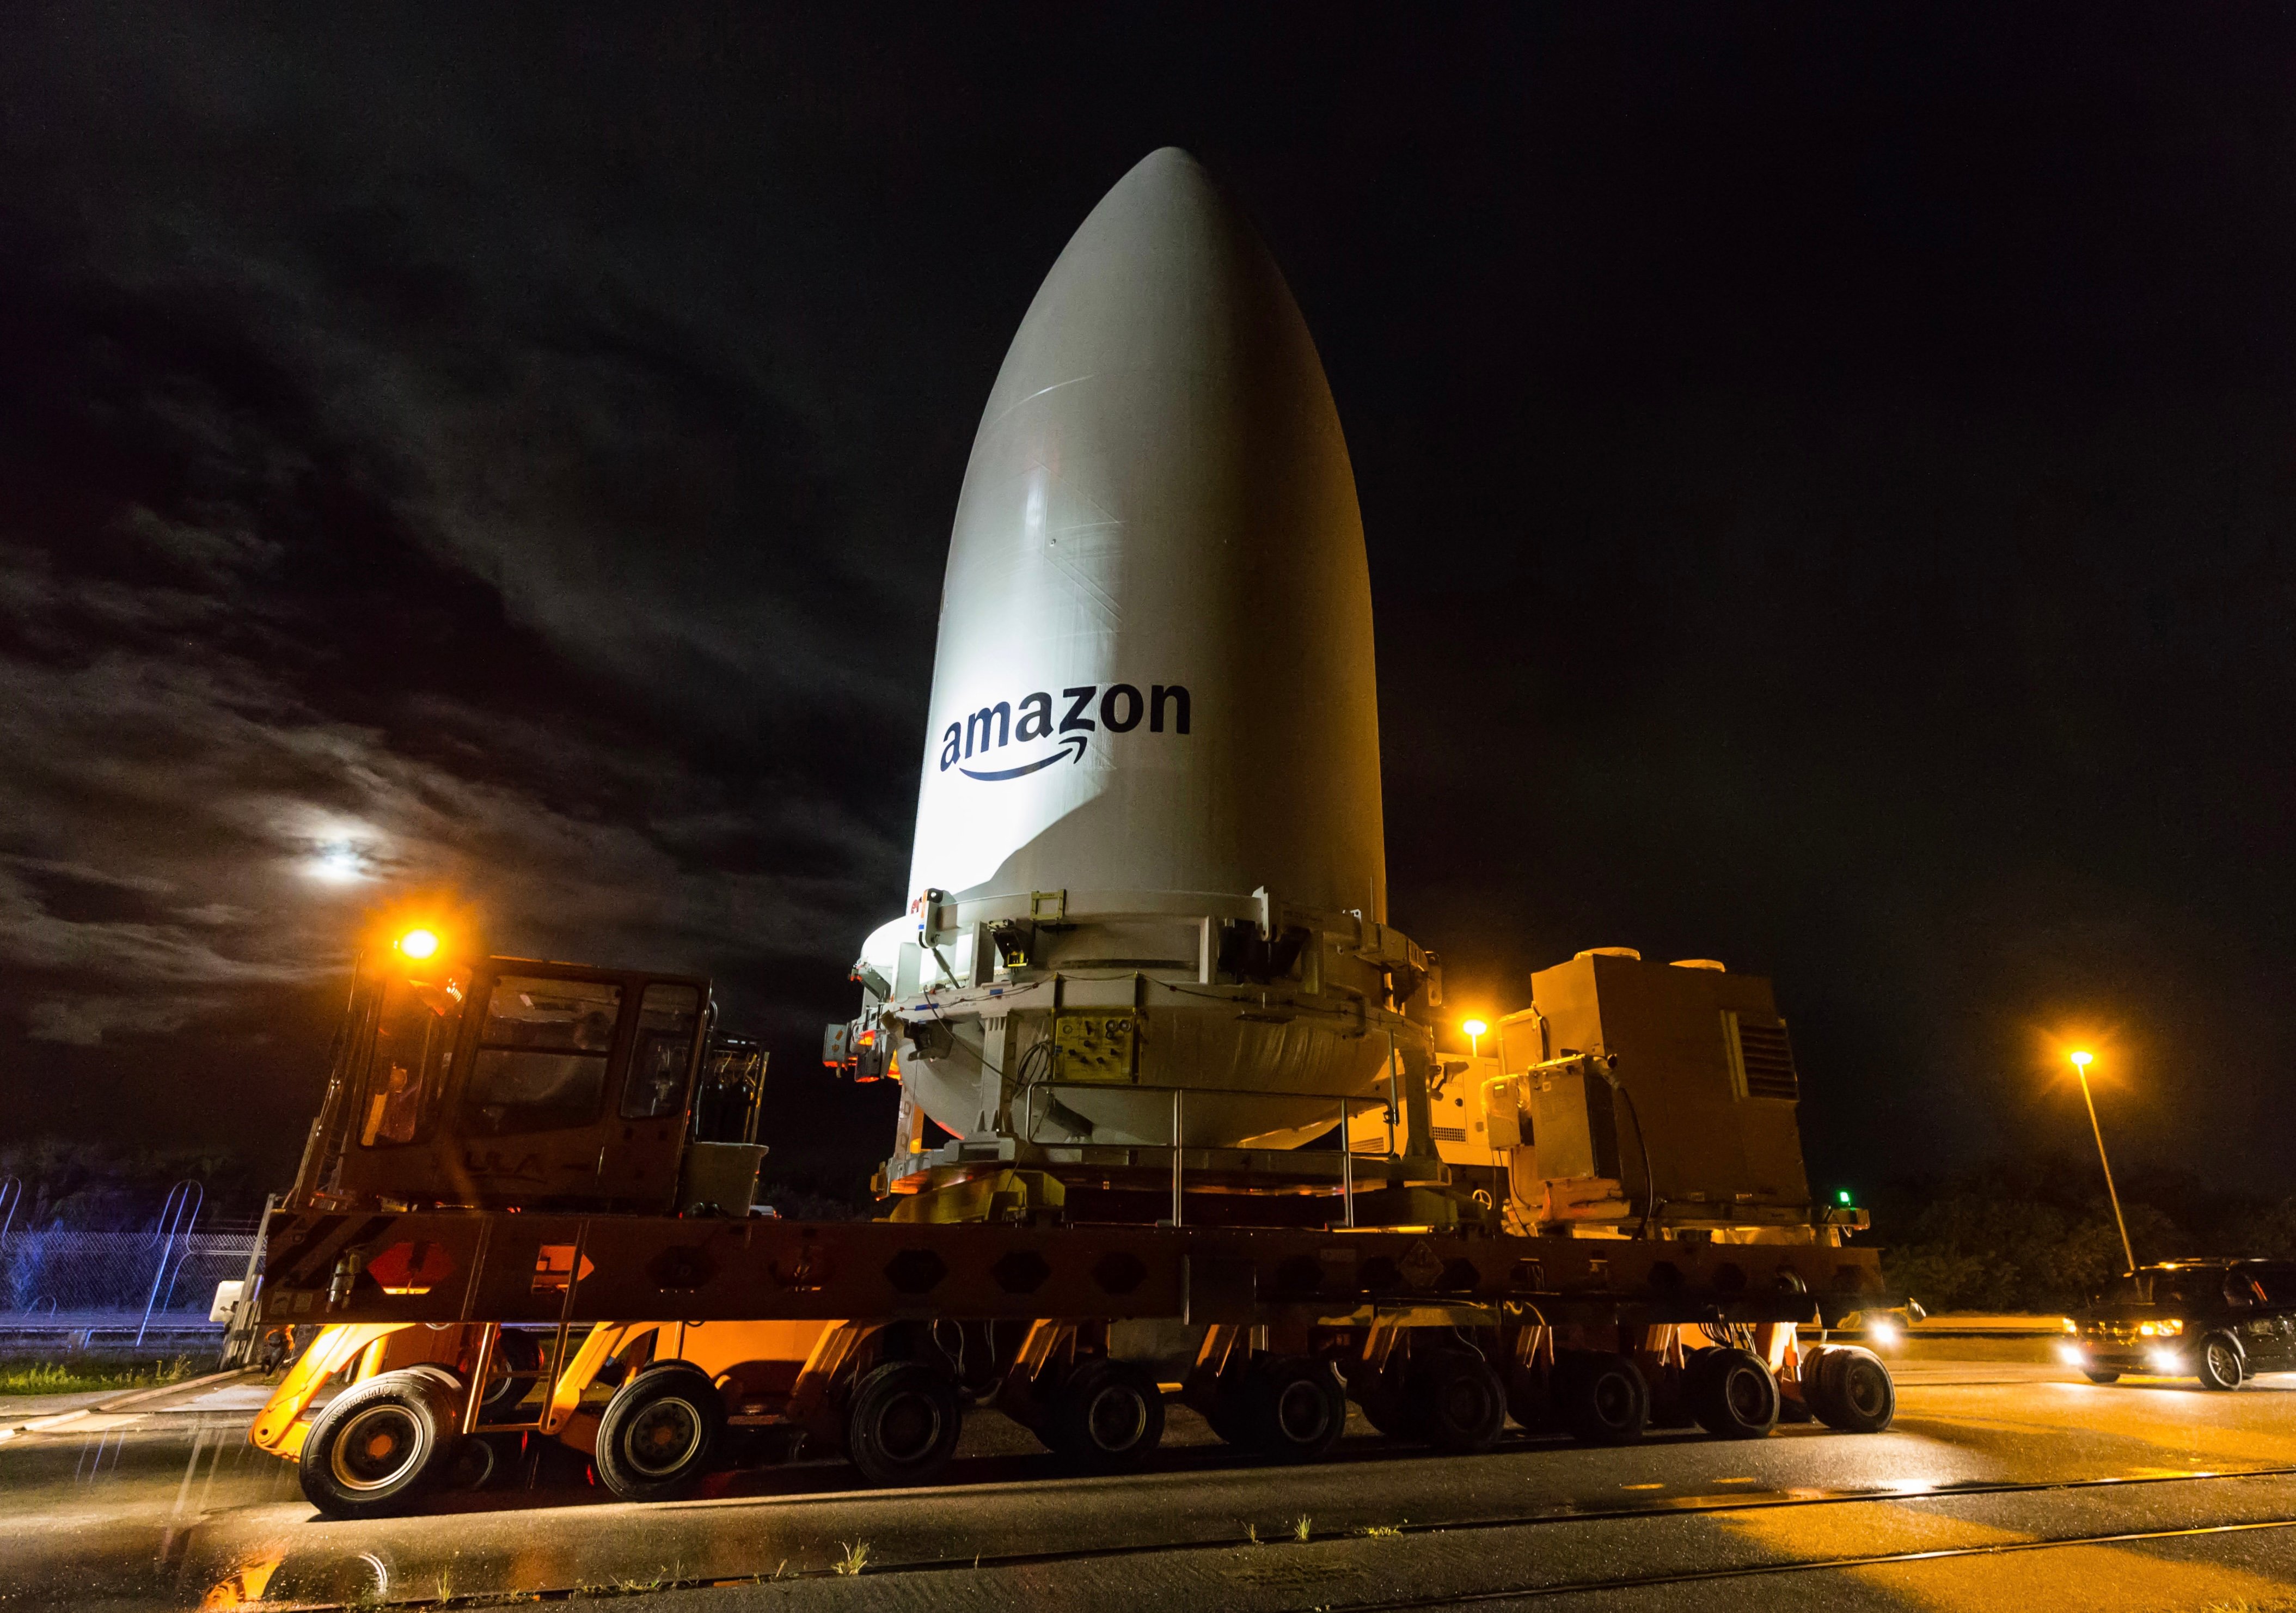 The Protoflight mission payload arrives at the VIF. Photo by United Launch Alliance